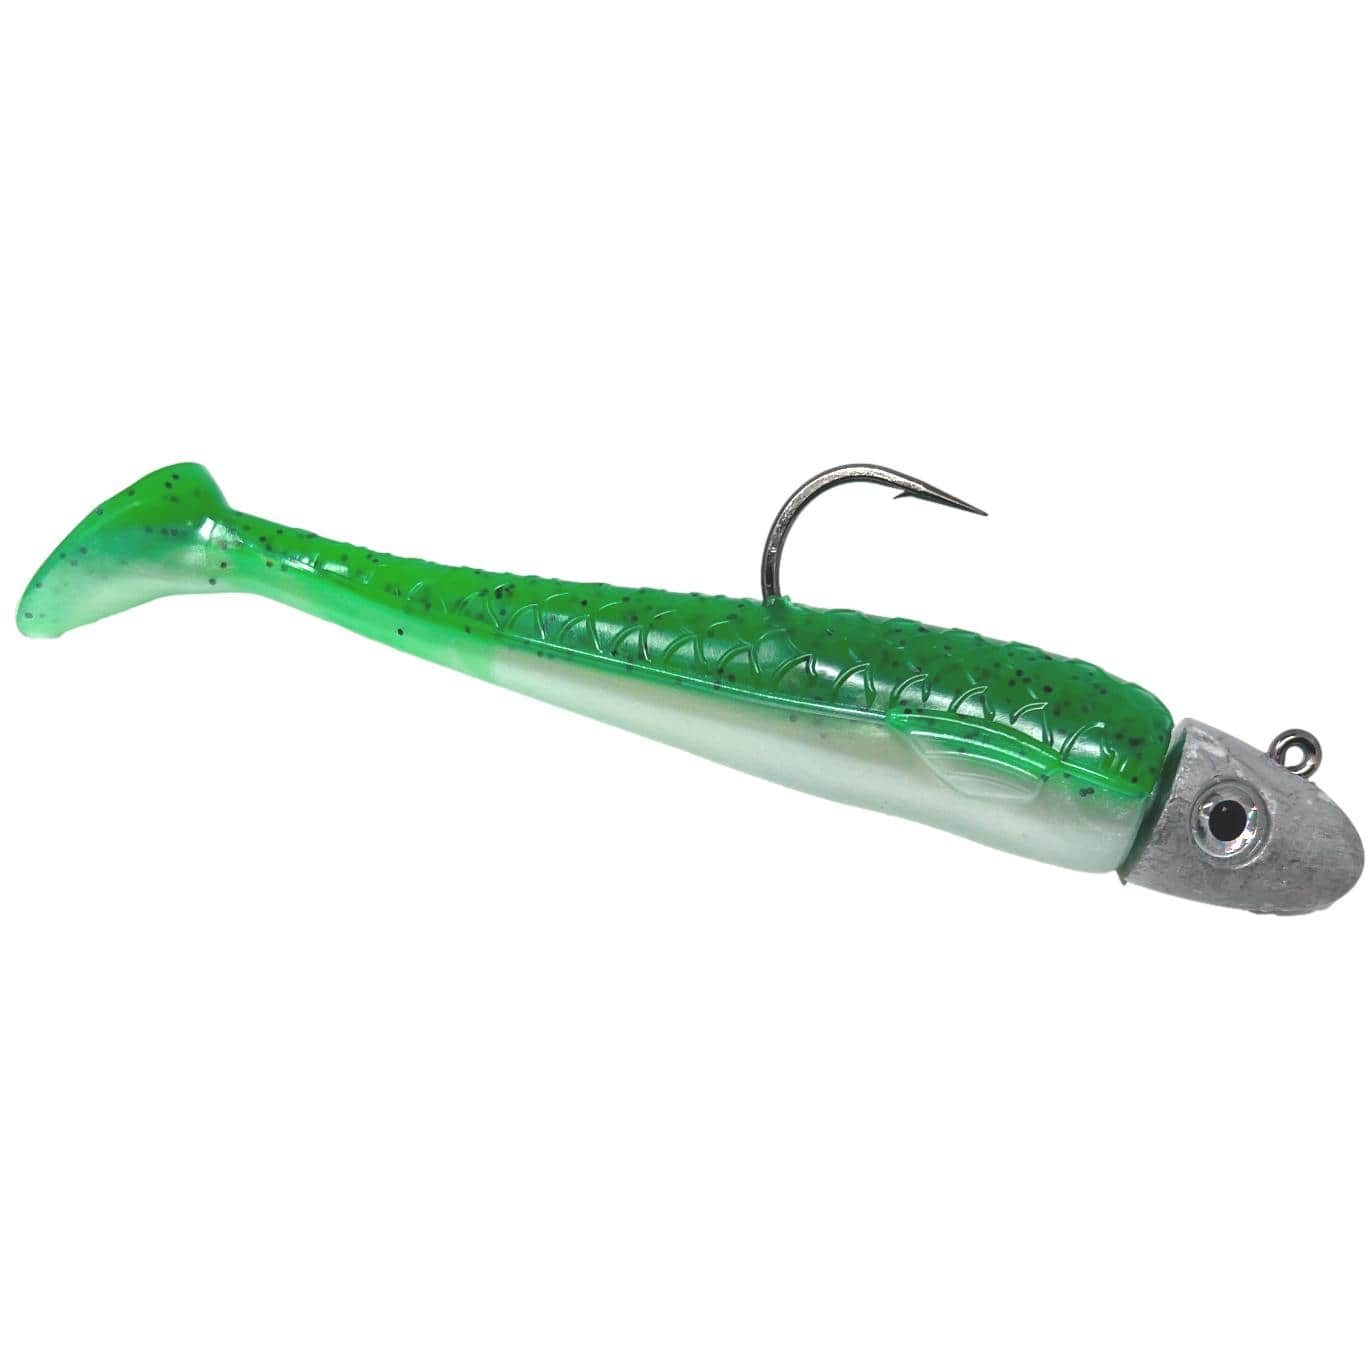 Saltwater Soft Plastic Lures Baits Pre-rigged Fishing Lures For